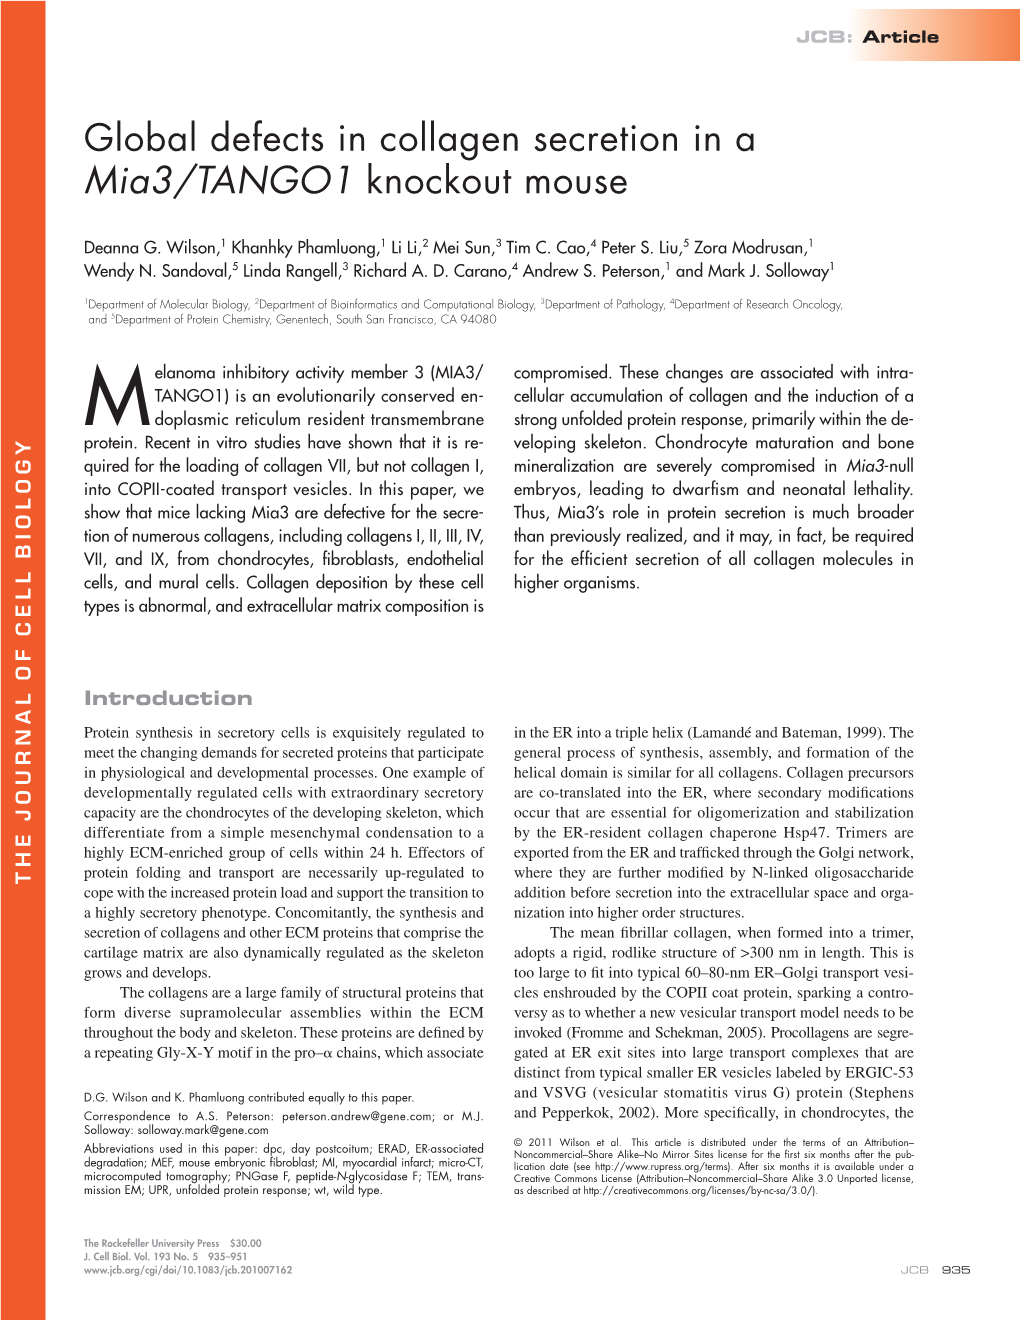 Global Defects in Collagen Secretion in a Mia3/TANGO1 Knockout Mouse